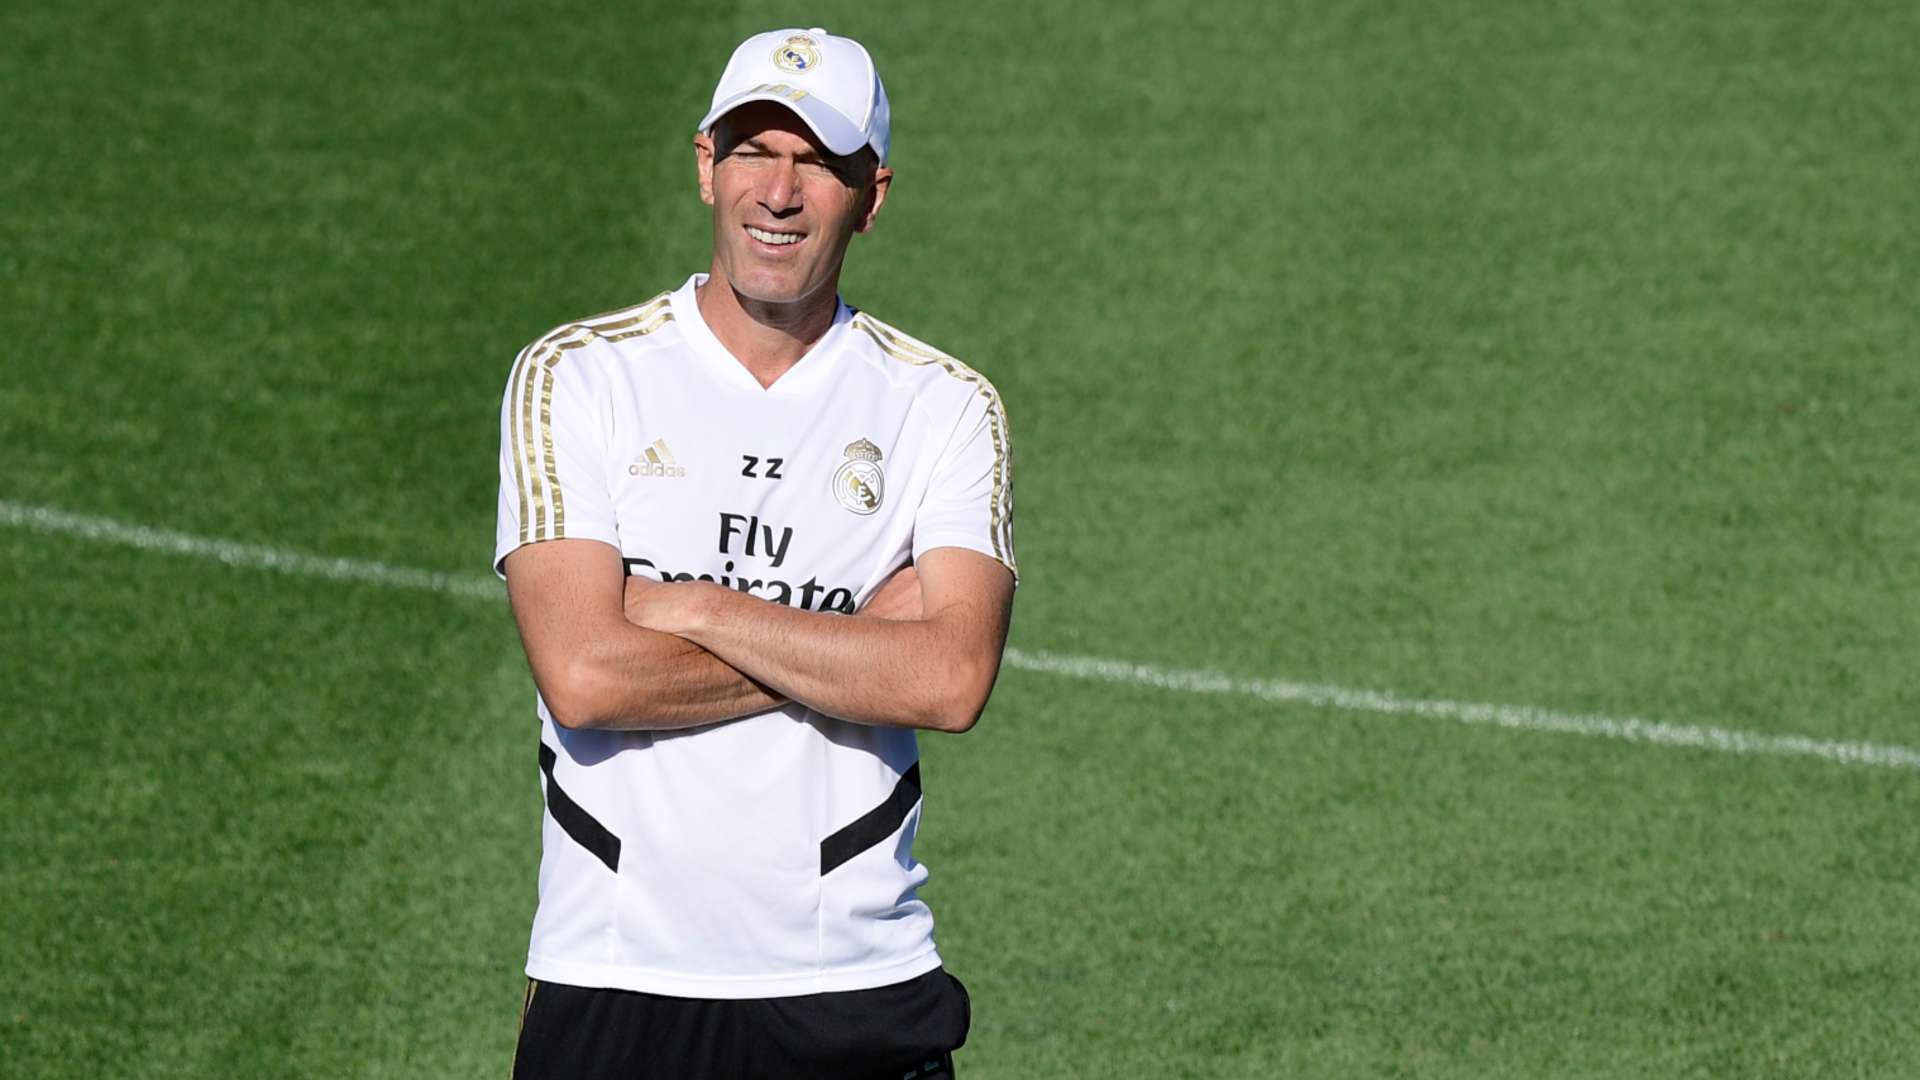 Zinedine Zidane, Real Madrid coach, during a training session in 2019-20 season